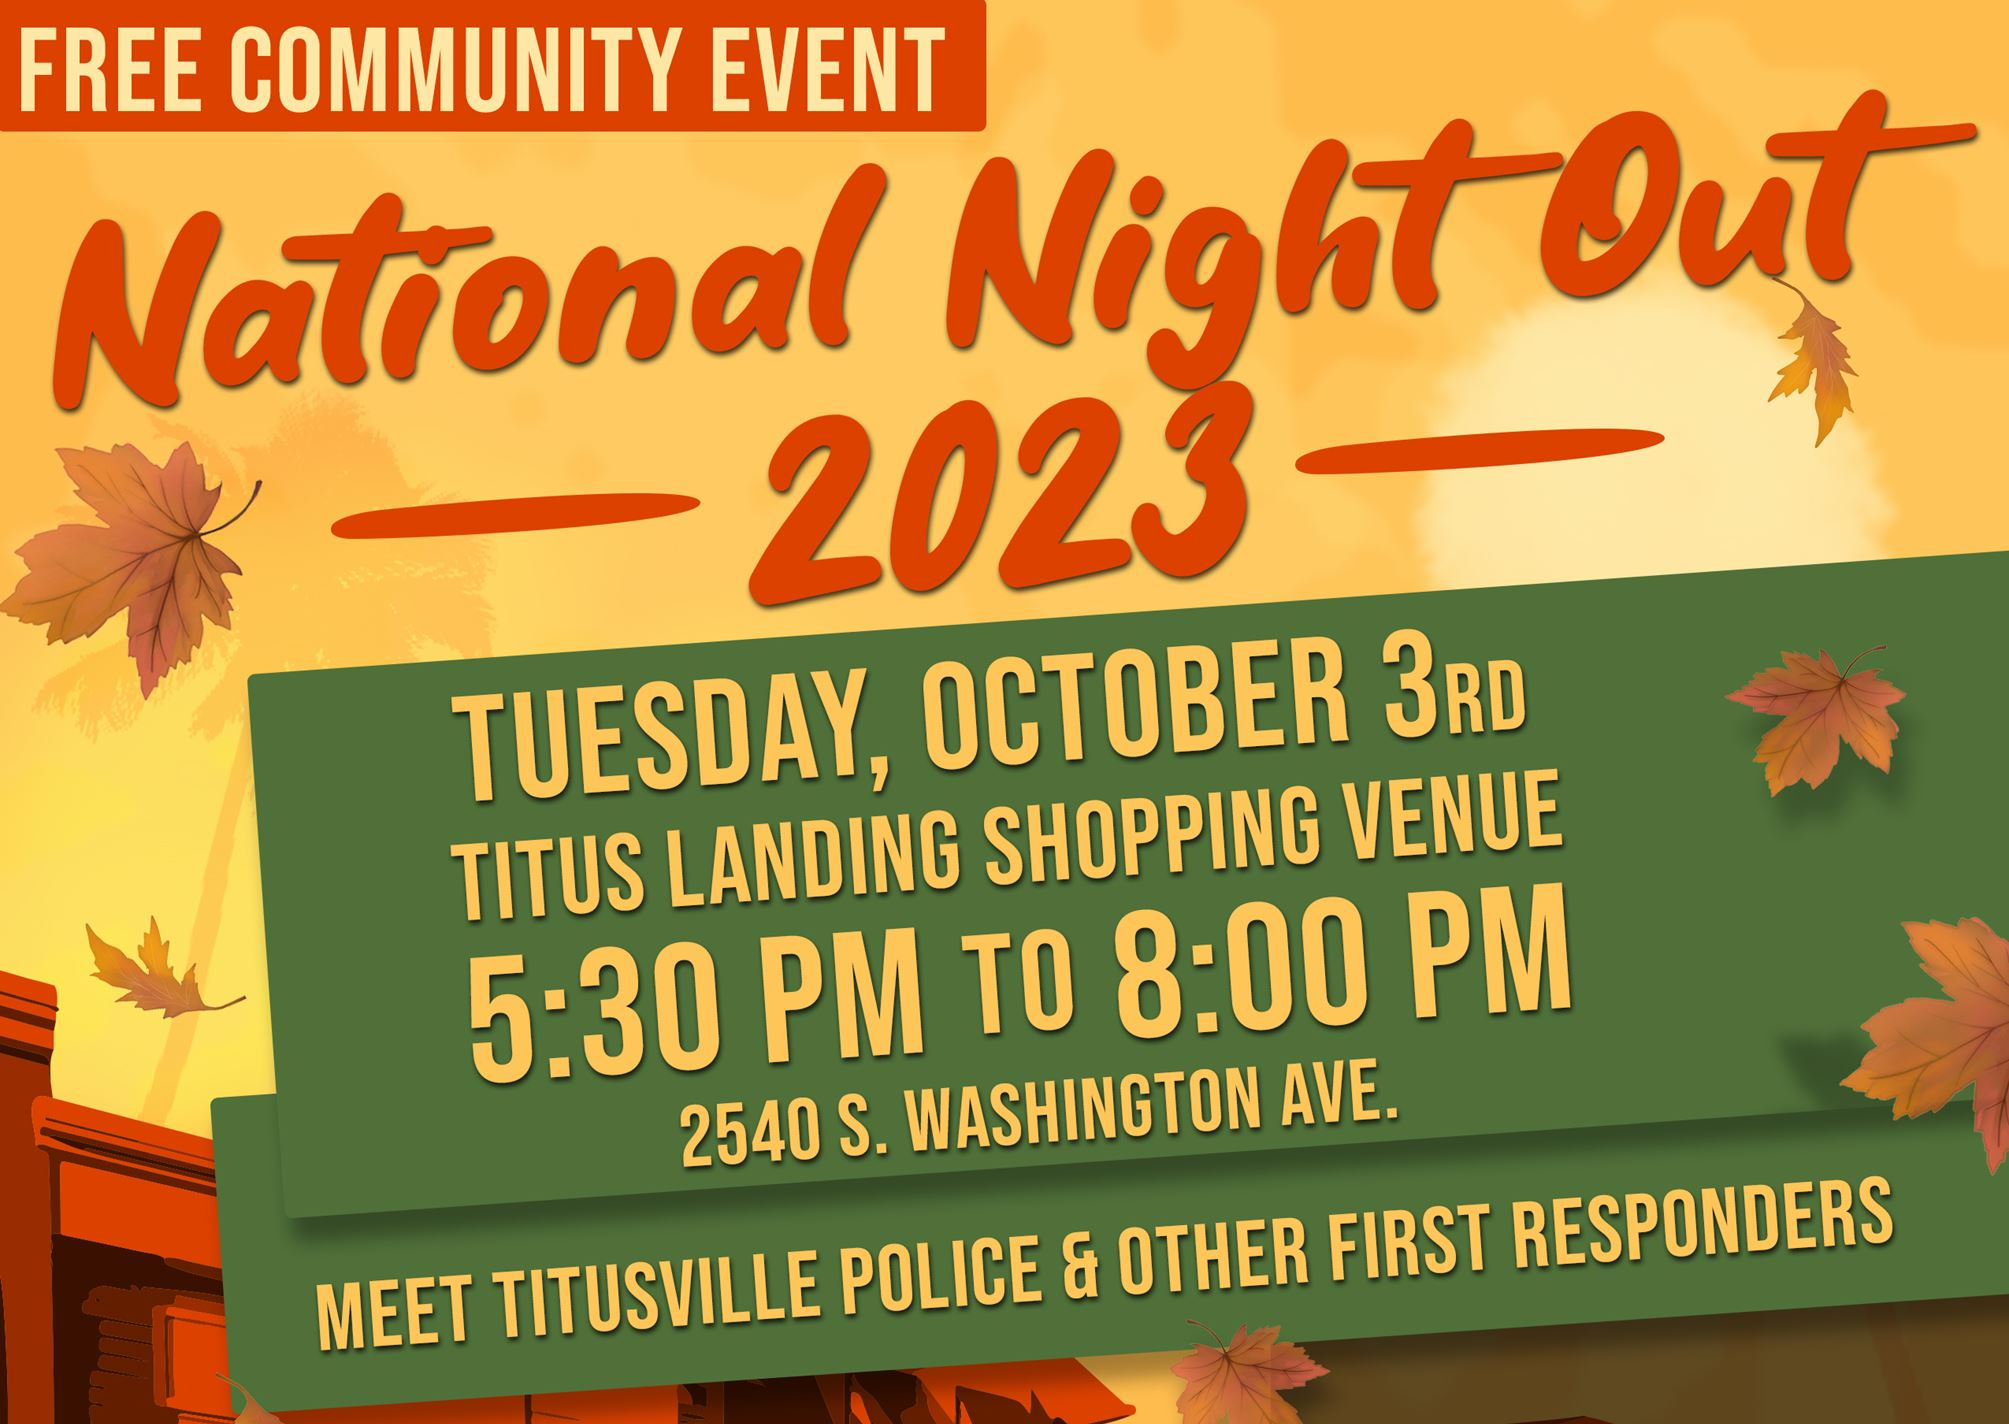 Titusville Police Department to Host National Night Out at Titus Landing